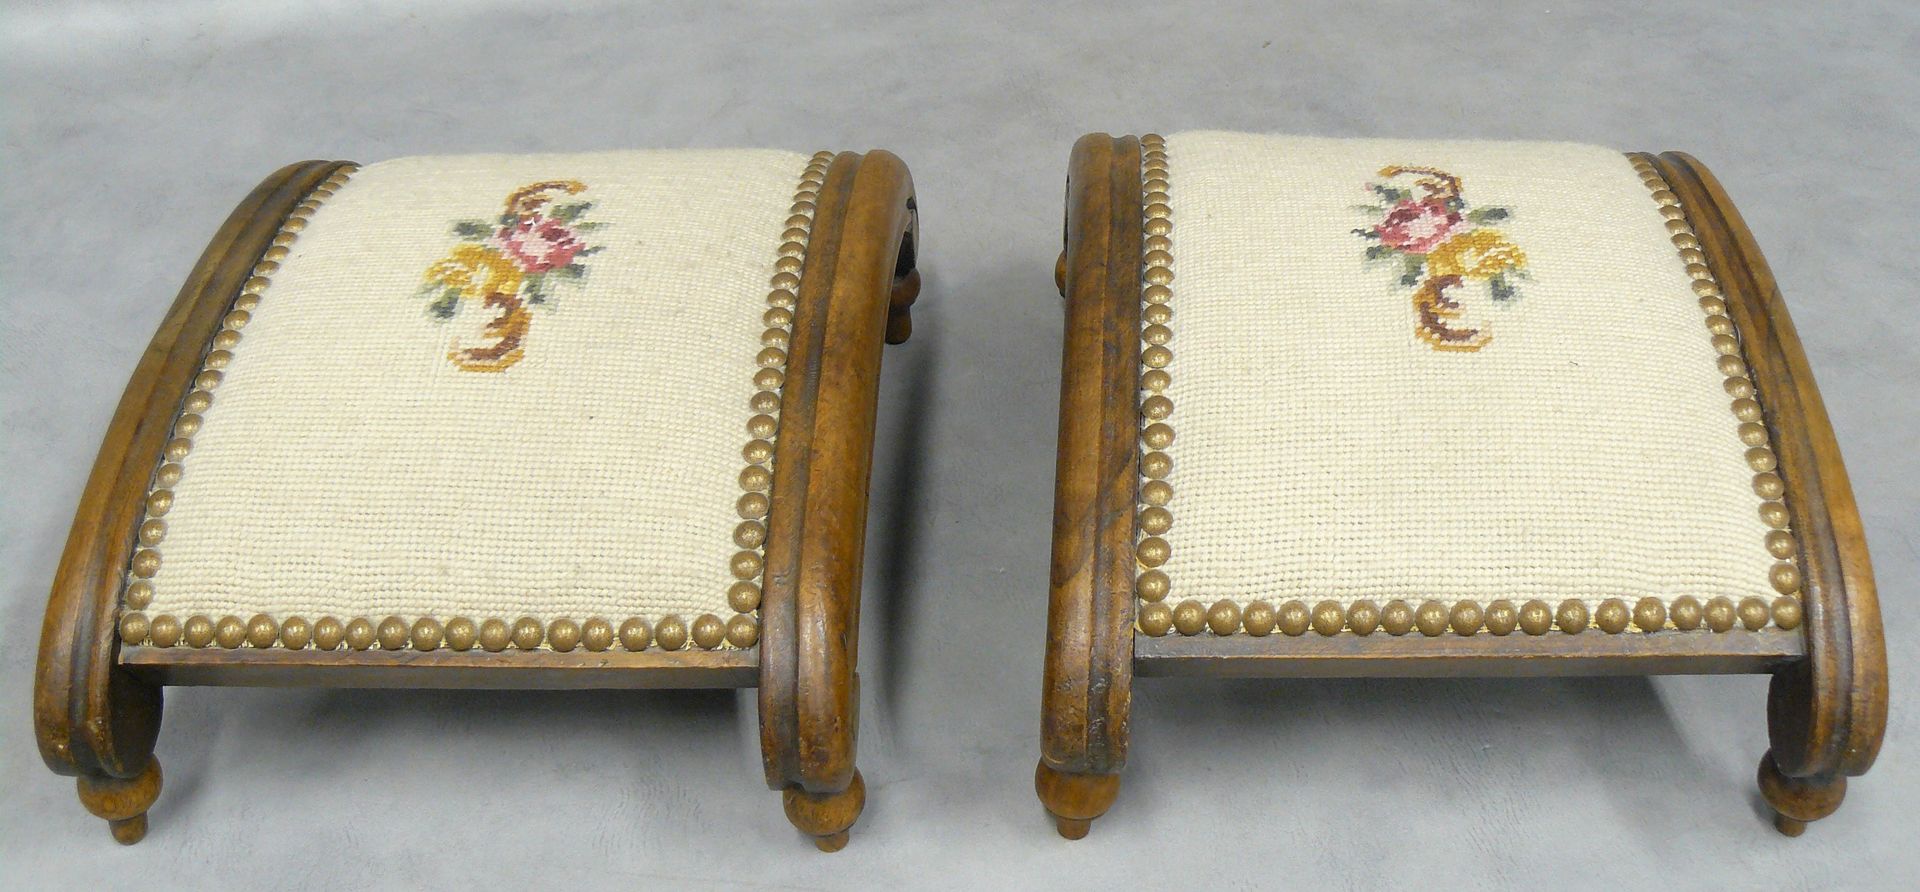 Null two footrests in the shape of a bridge L 32 cm, wood and tapestry